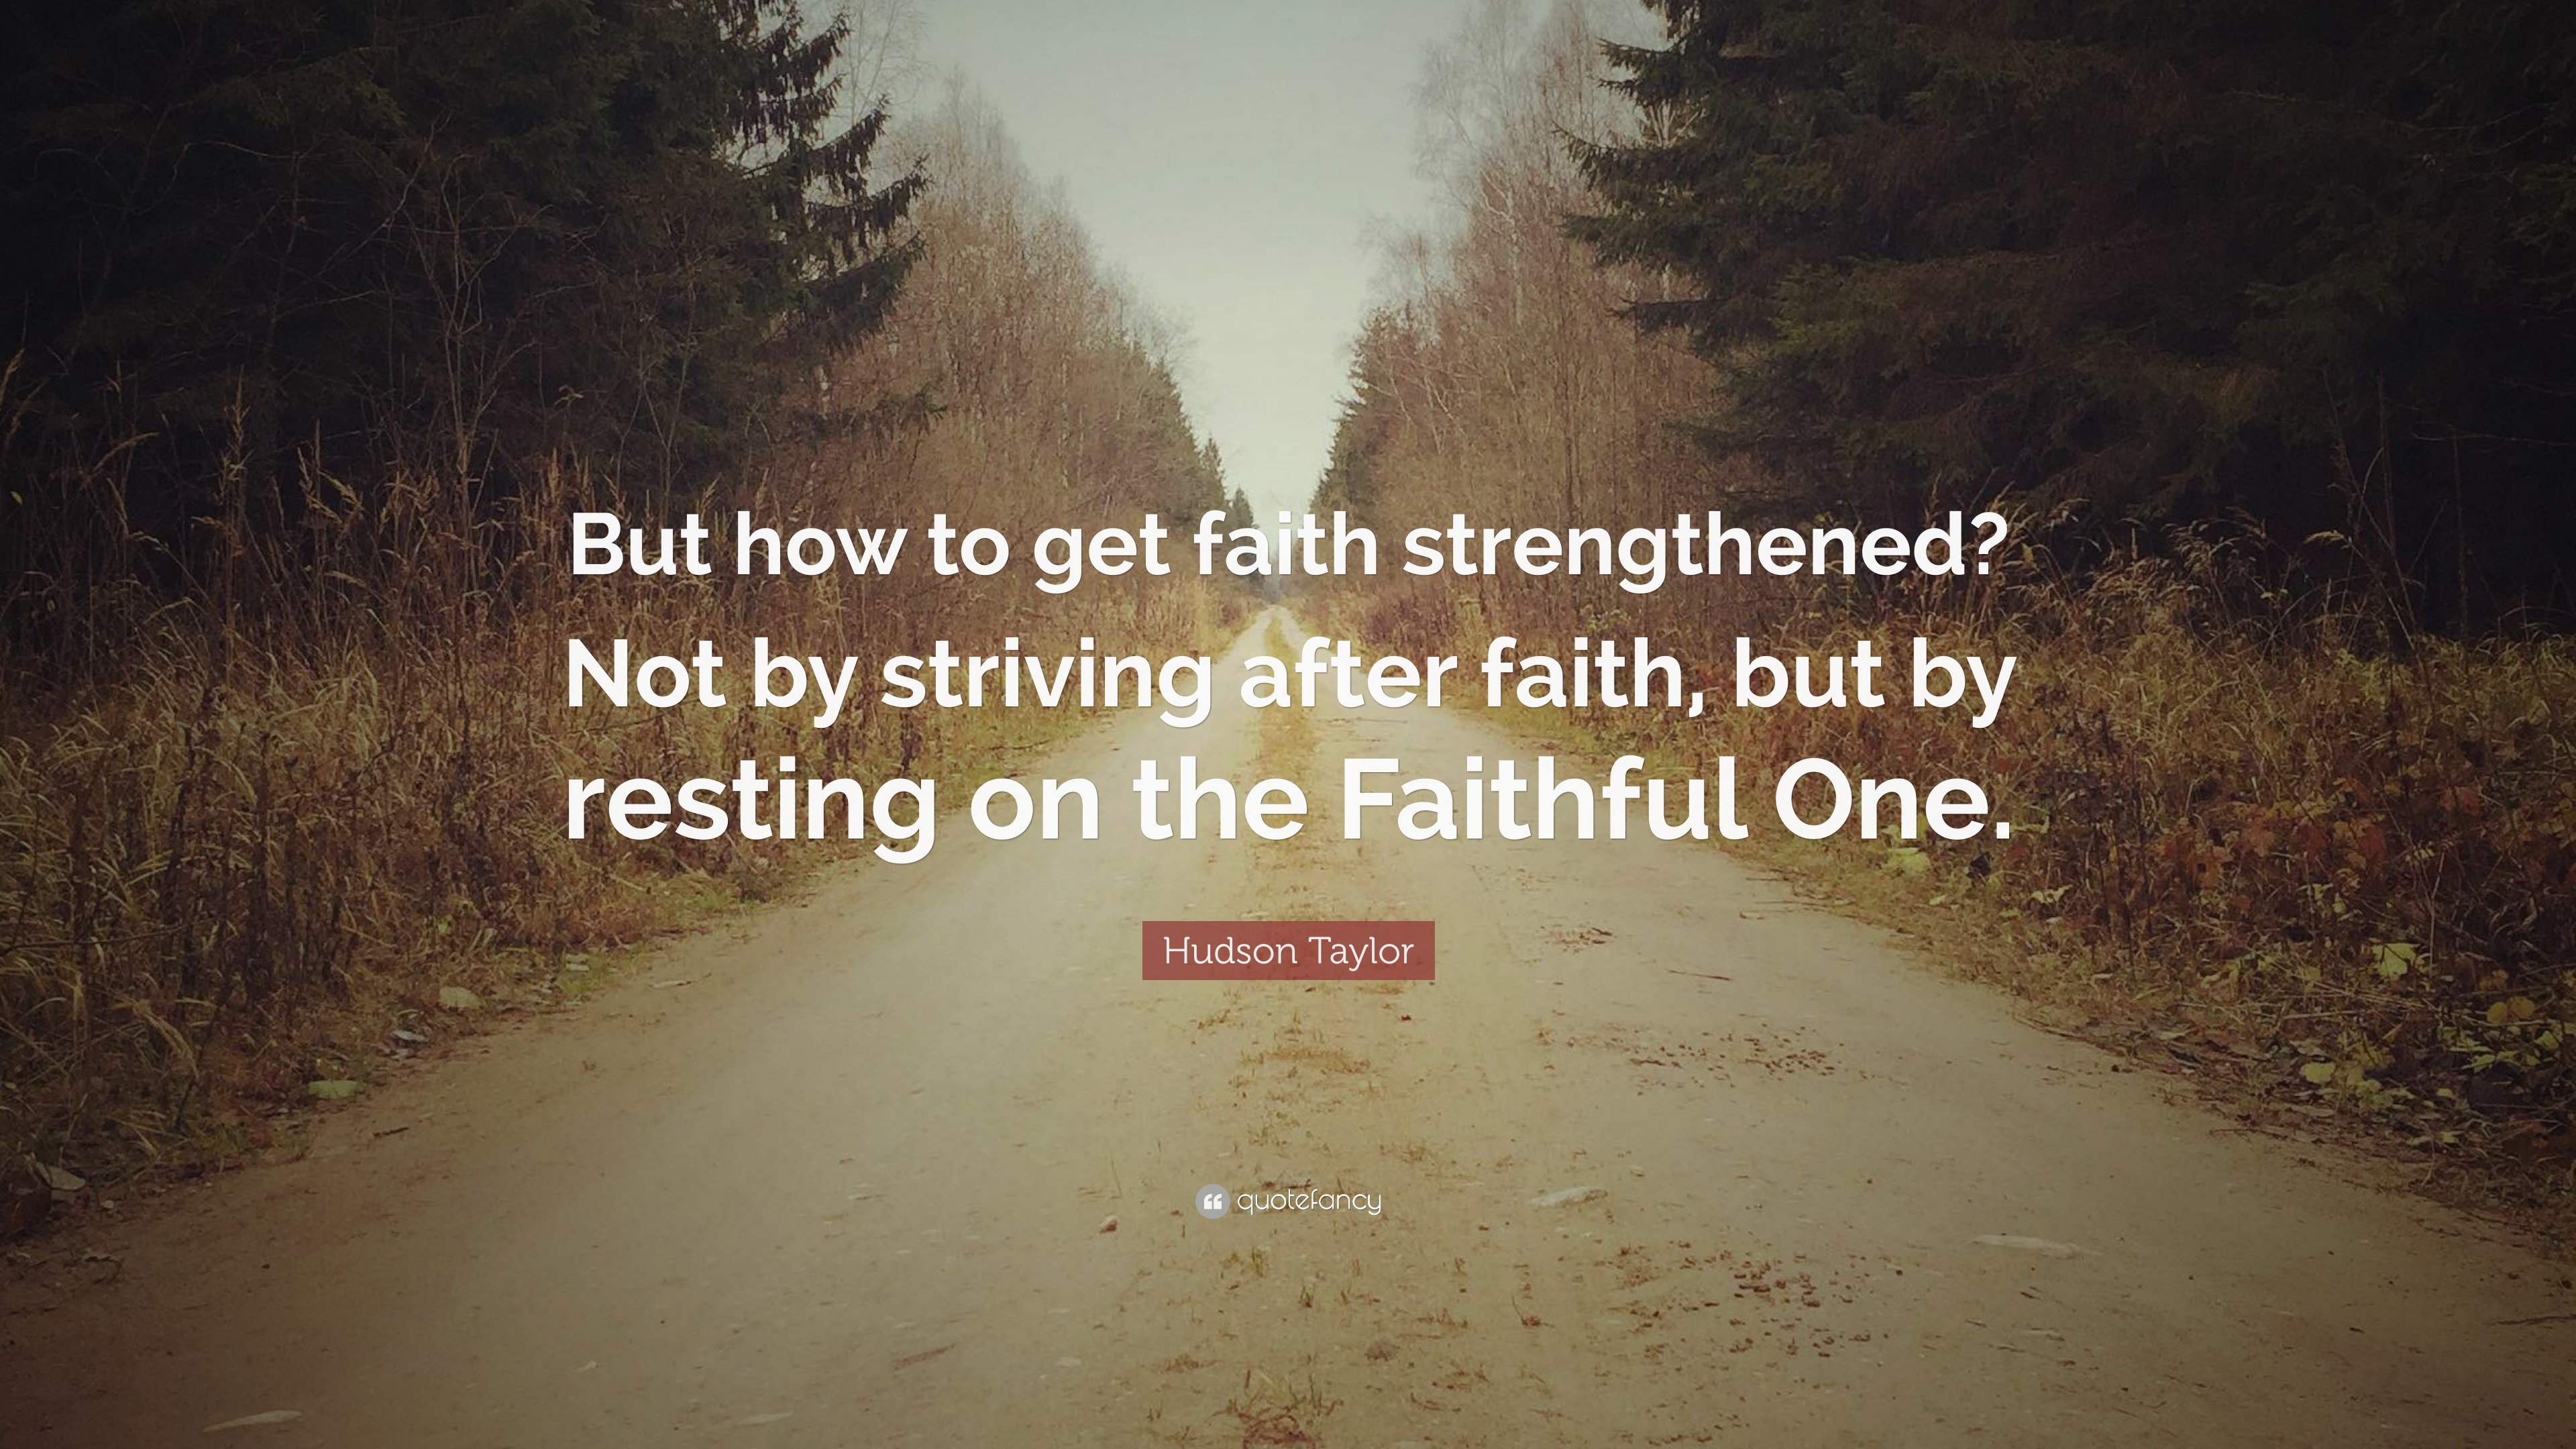 James Hudson Taylor Quote: “But how to get faith strengthened? Not by ...